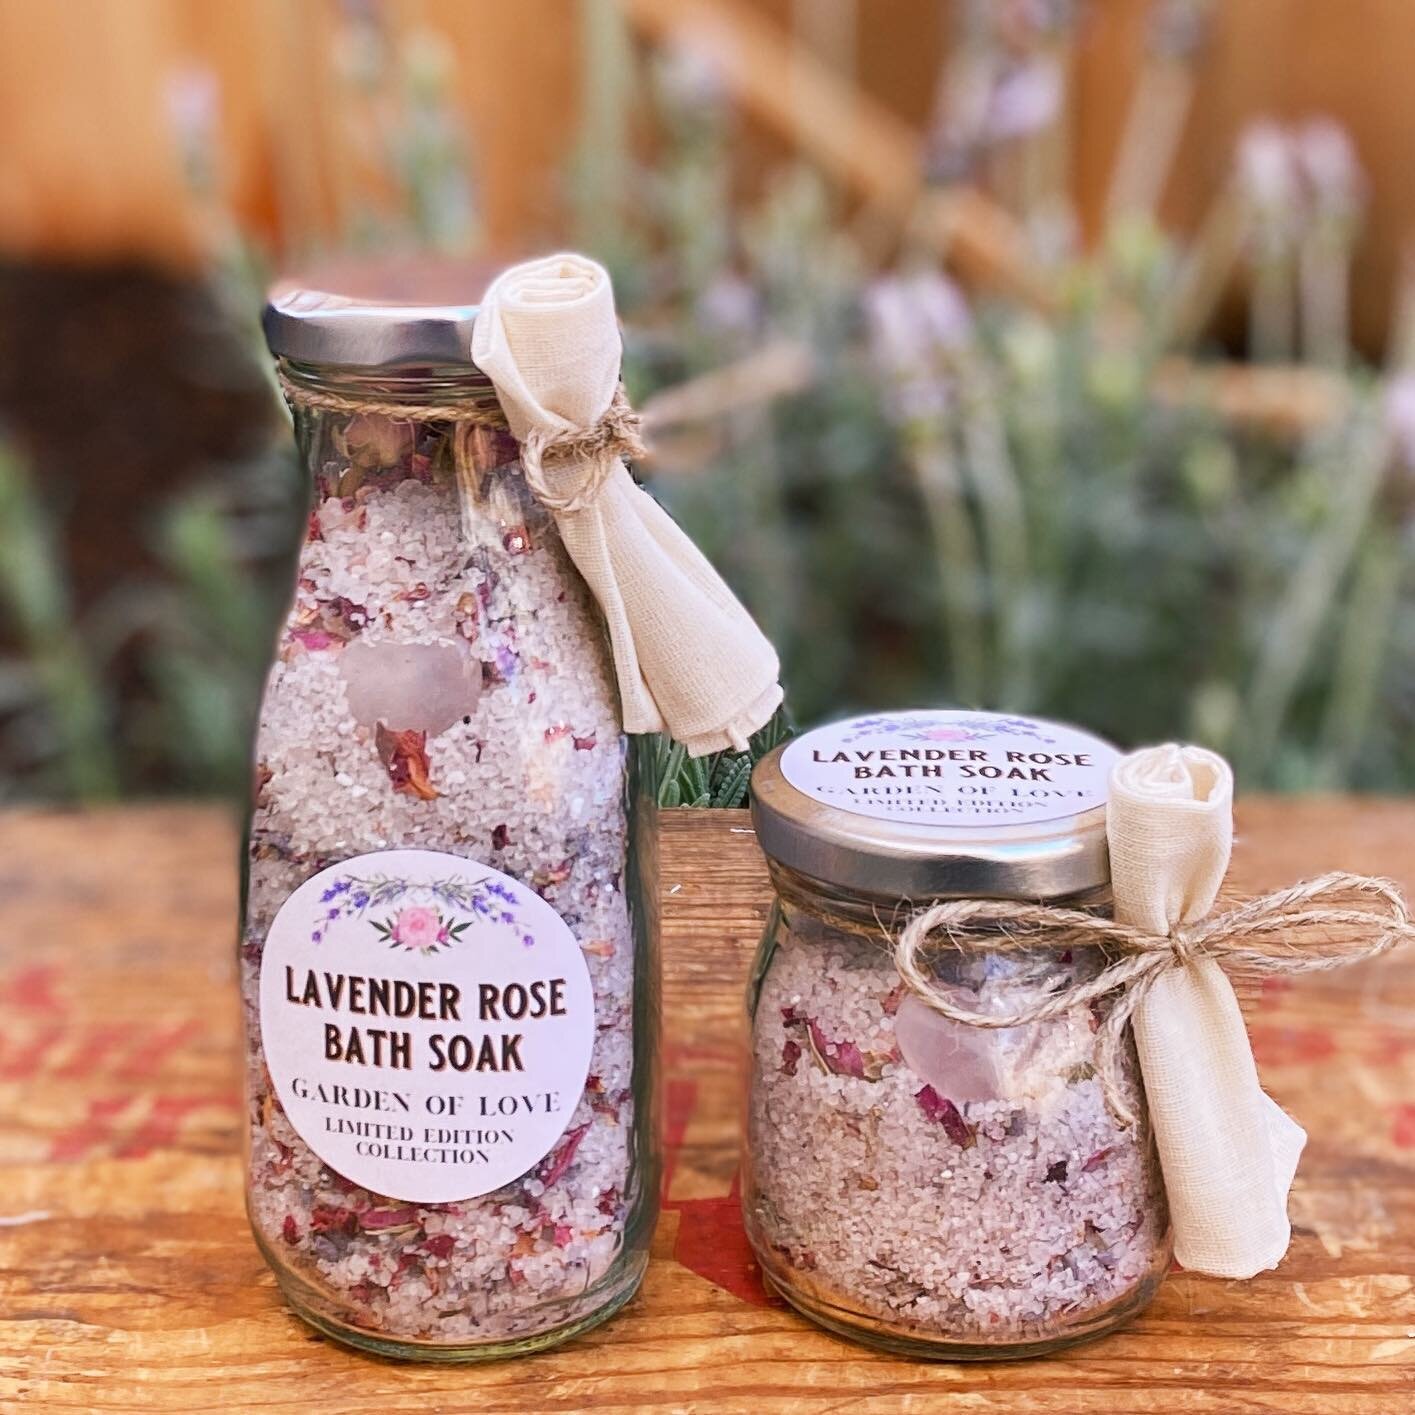 It&rsquo;s Love season and we&rsquo;ve made a new, limited edition Lavender Rose Bath Soak for you or the ones you love!
Our Garden of Love Bath Soak contains Dead Sea salt, pink Himalayan salt, rose petals, locally grown lavender buds from our frien